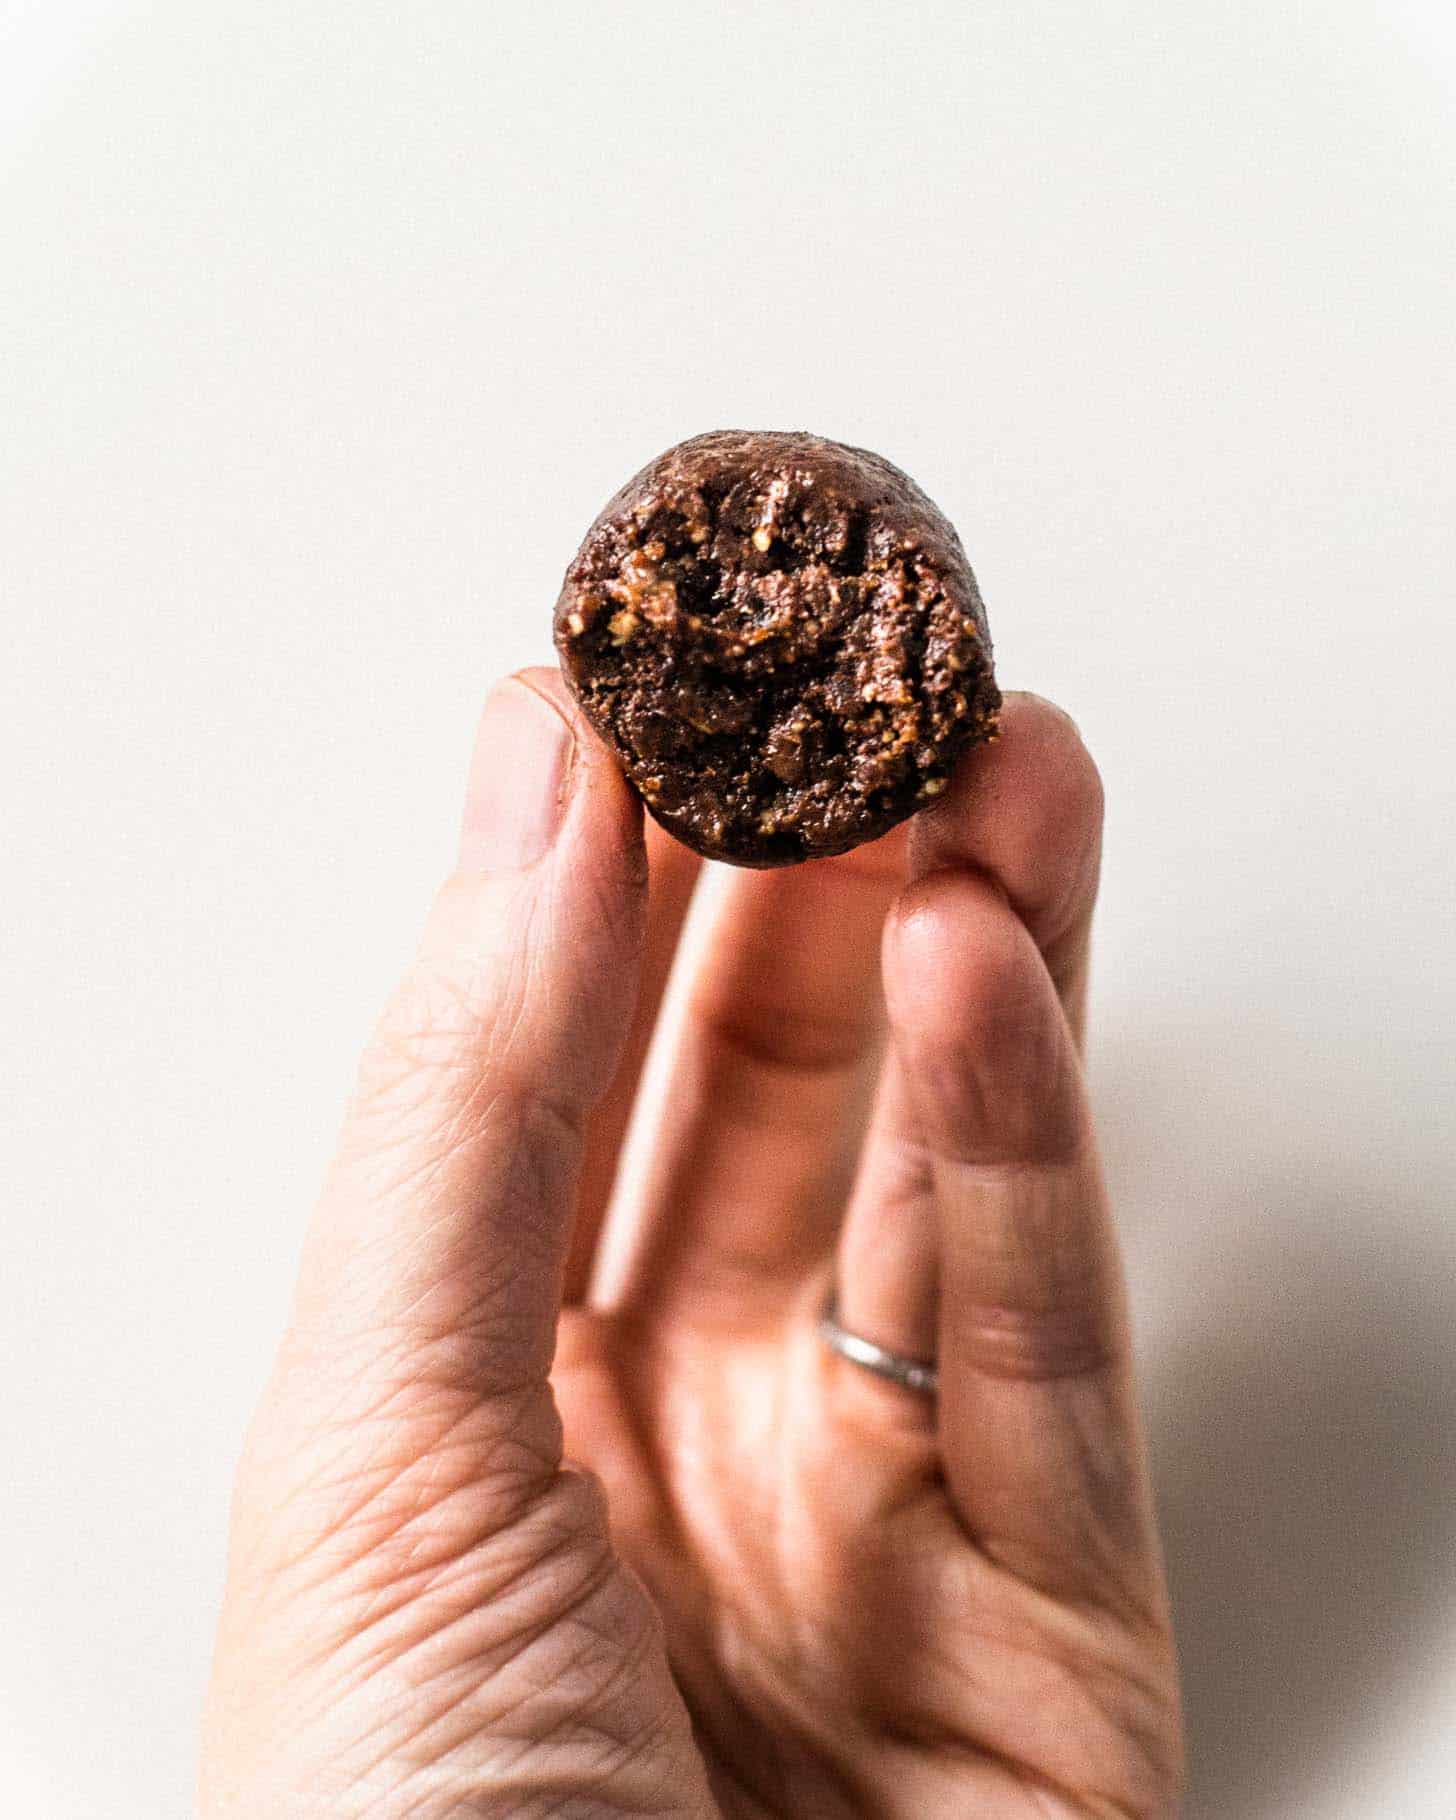 a hand holding a chocolate energy bite